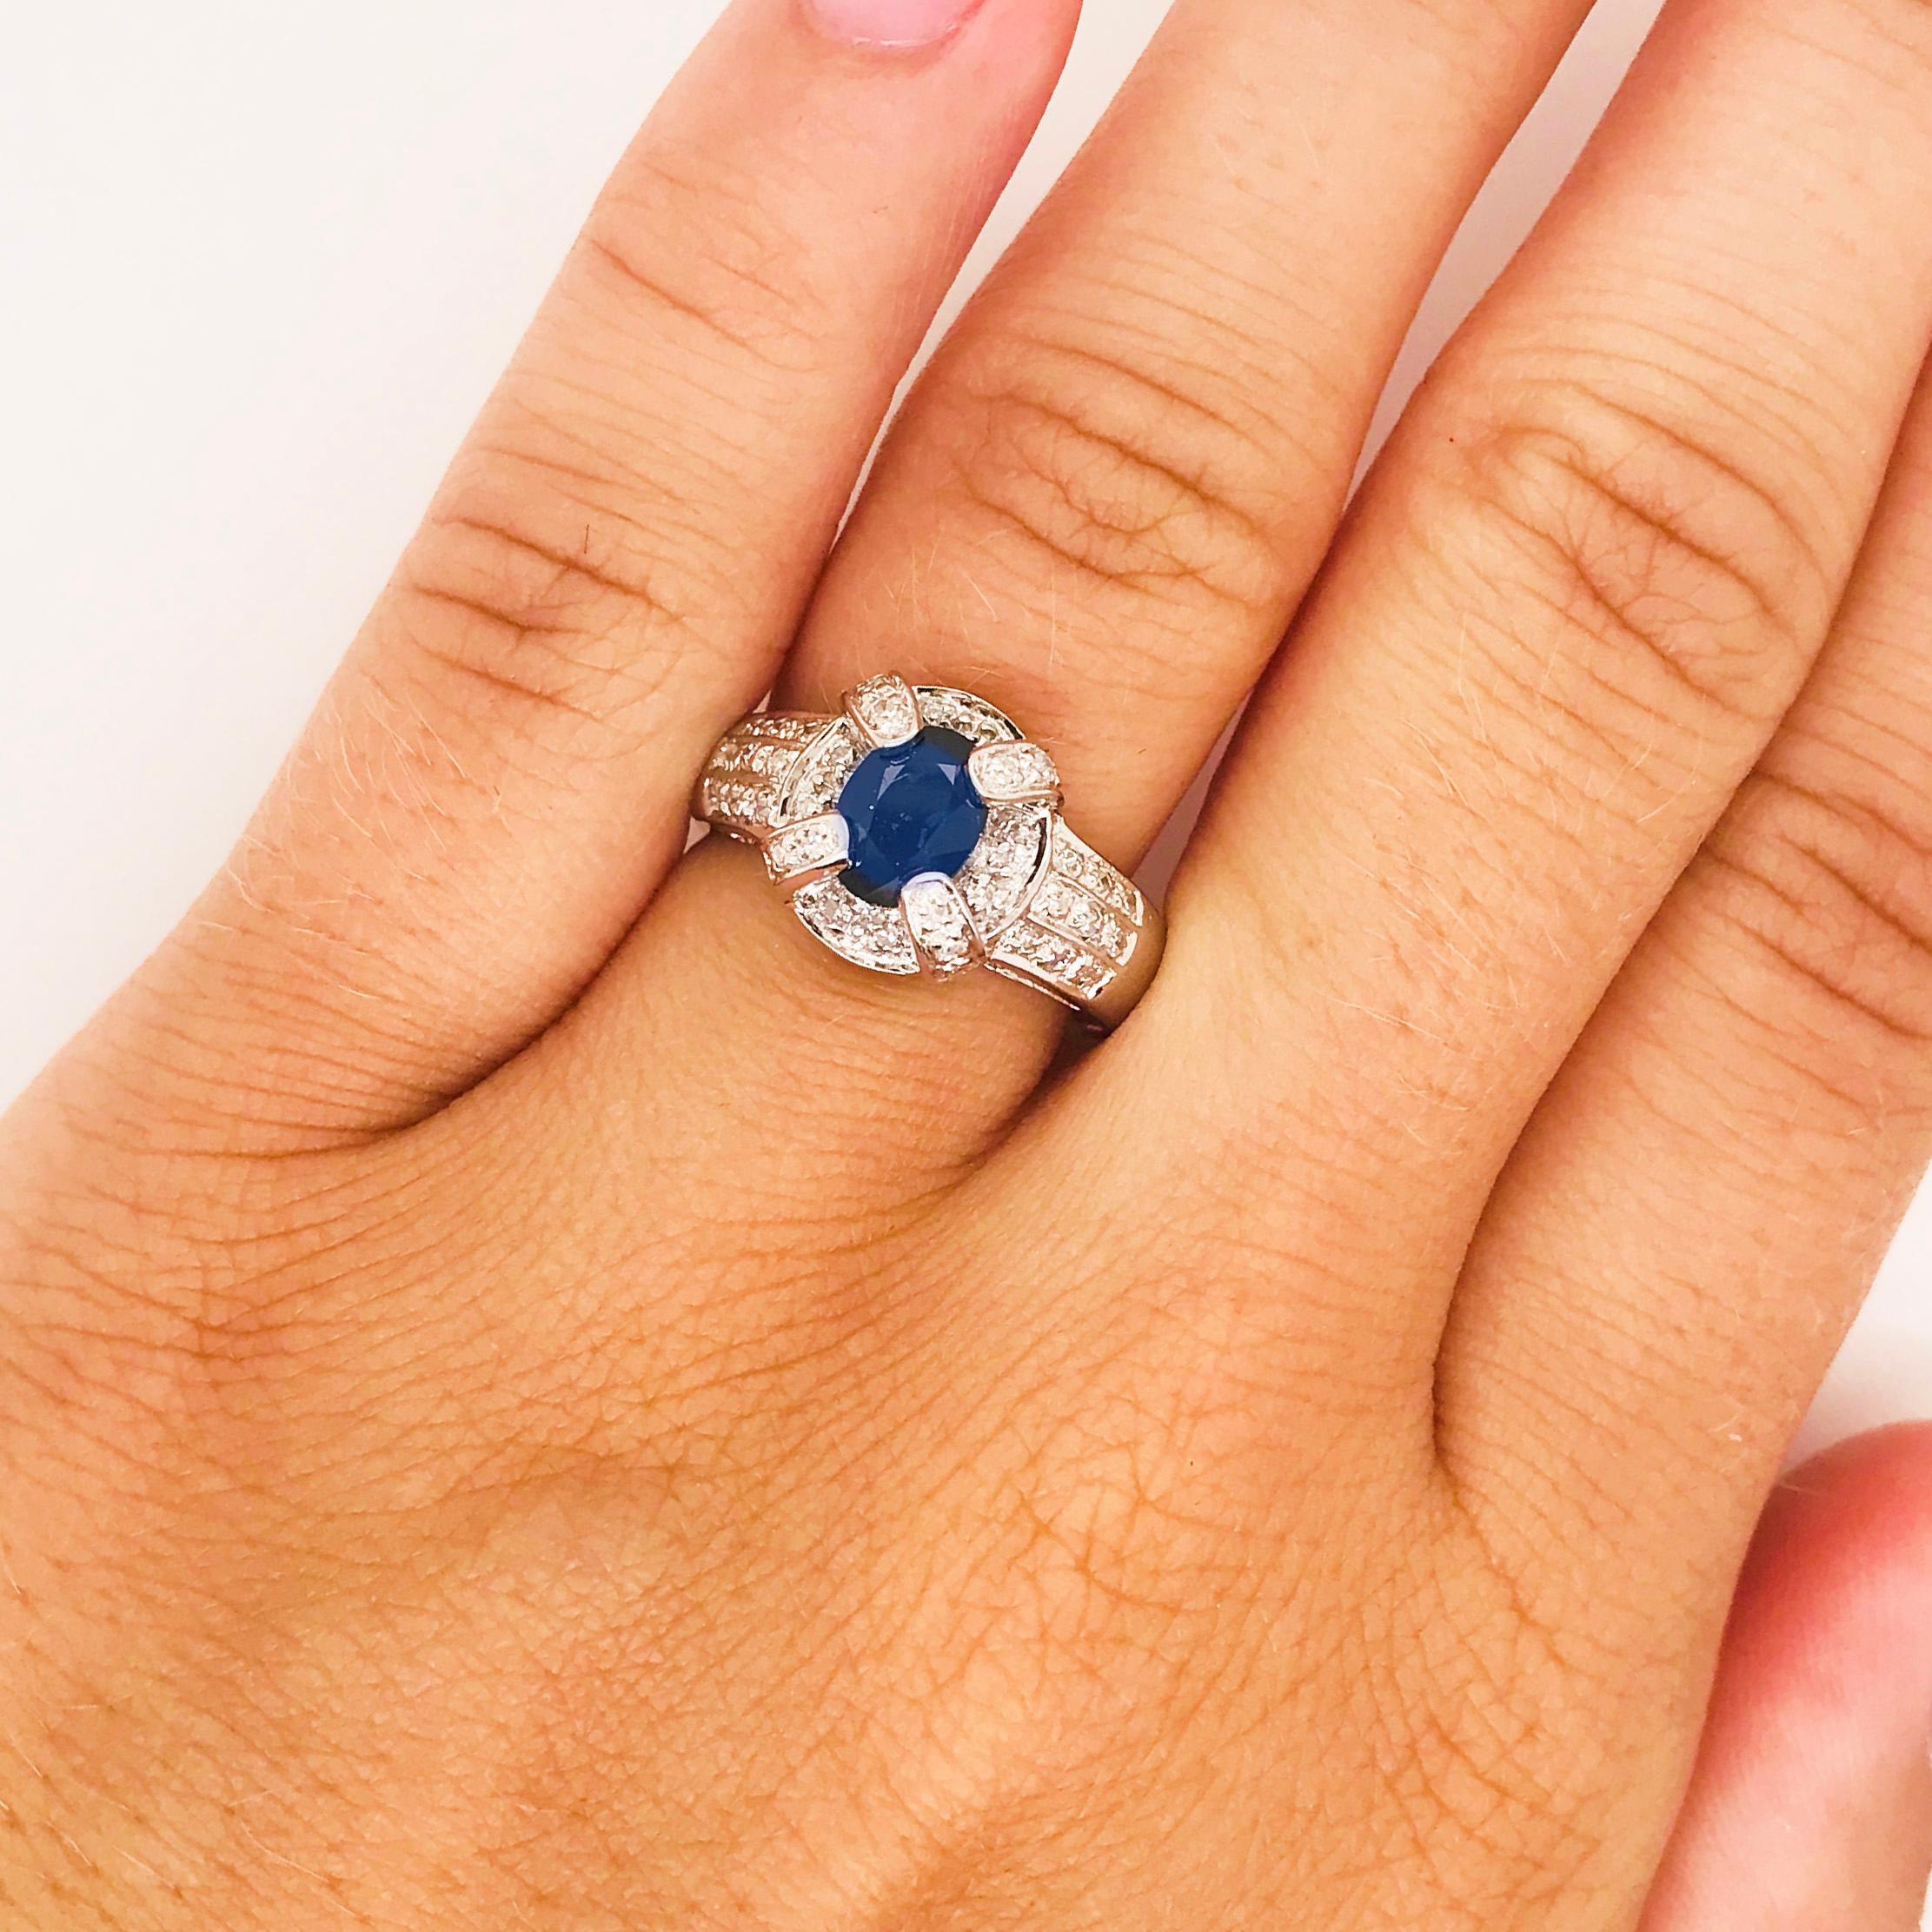 The stunning blue sapphire and diamond engagement ring is a classic and timeless fine jewelry piece. The enter is a genuine blue sapphire gemstone that has been cut and polished into a perfectly symmetrical faceted oval shape. The oval shape is